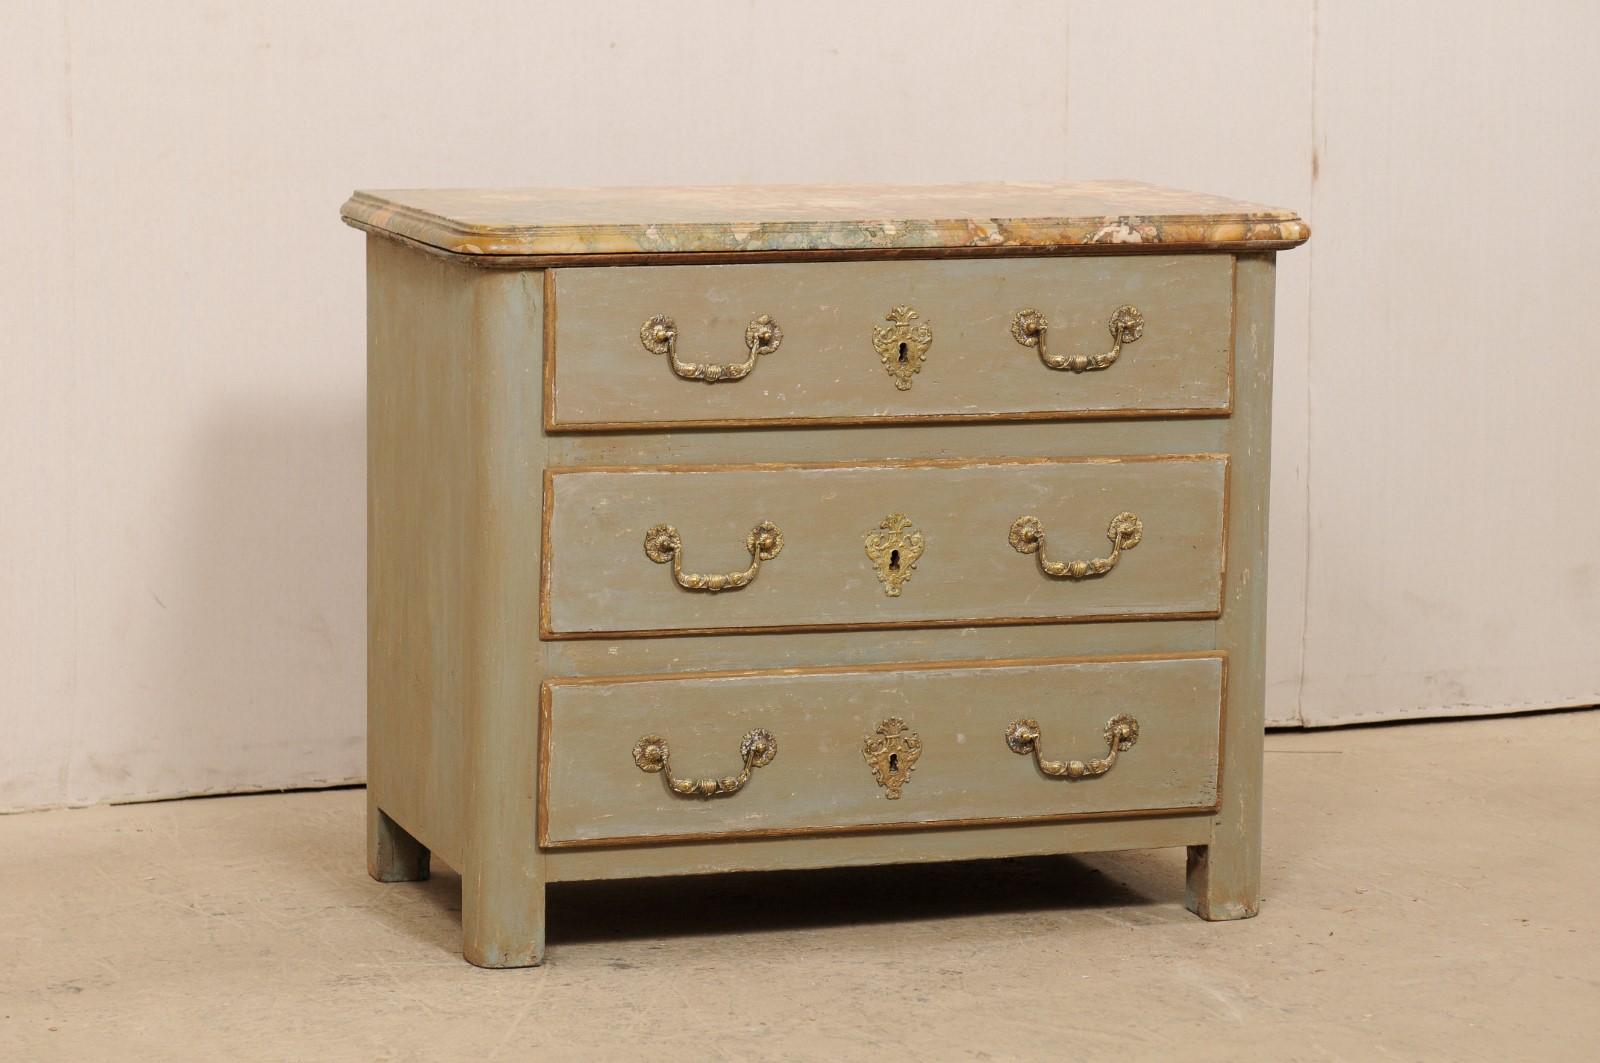 An 18th century French commode with an unusually colored and quite beautiful marble top. This antique chest from France has a rectangular-shaped marble top, over the wooden case which houses three full-sized, graduated doors. Drawers are flanked